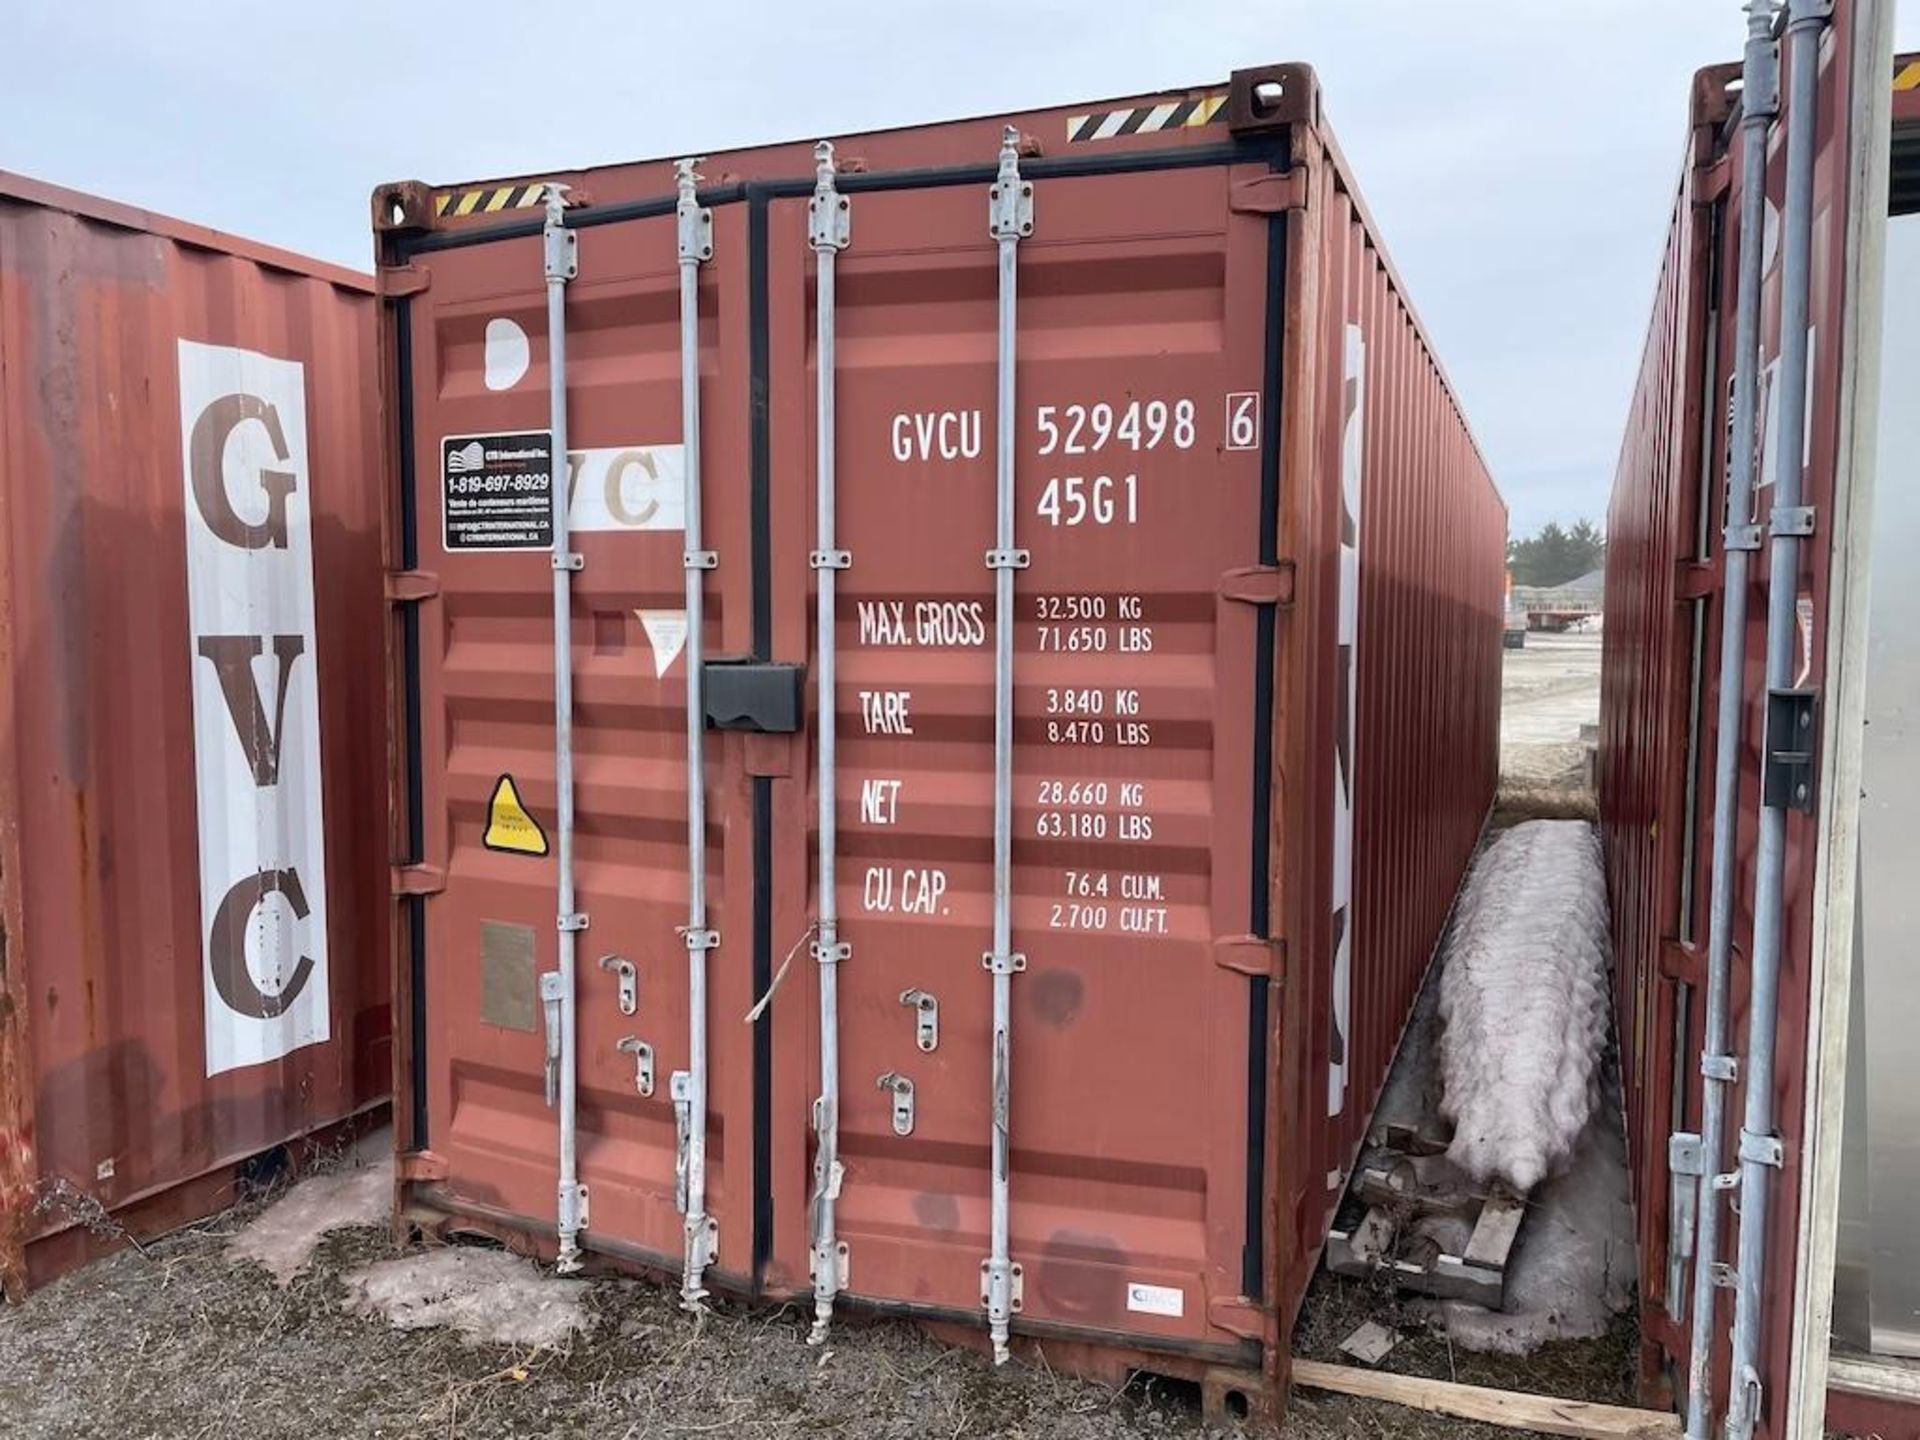 40 FT SEA CONTAINER, EXCLUDING CONTENTS, DELAYED PICK UP UNTIL MAY 13 [5] [TROIS RIVIERES] *PLEASE N - Image 2 of 4